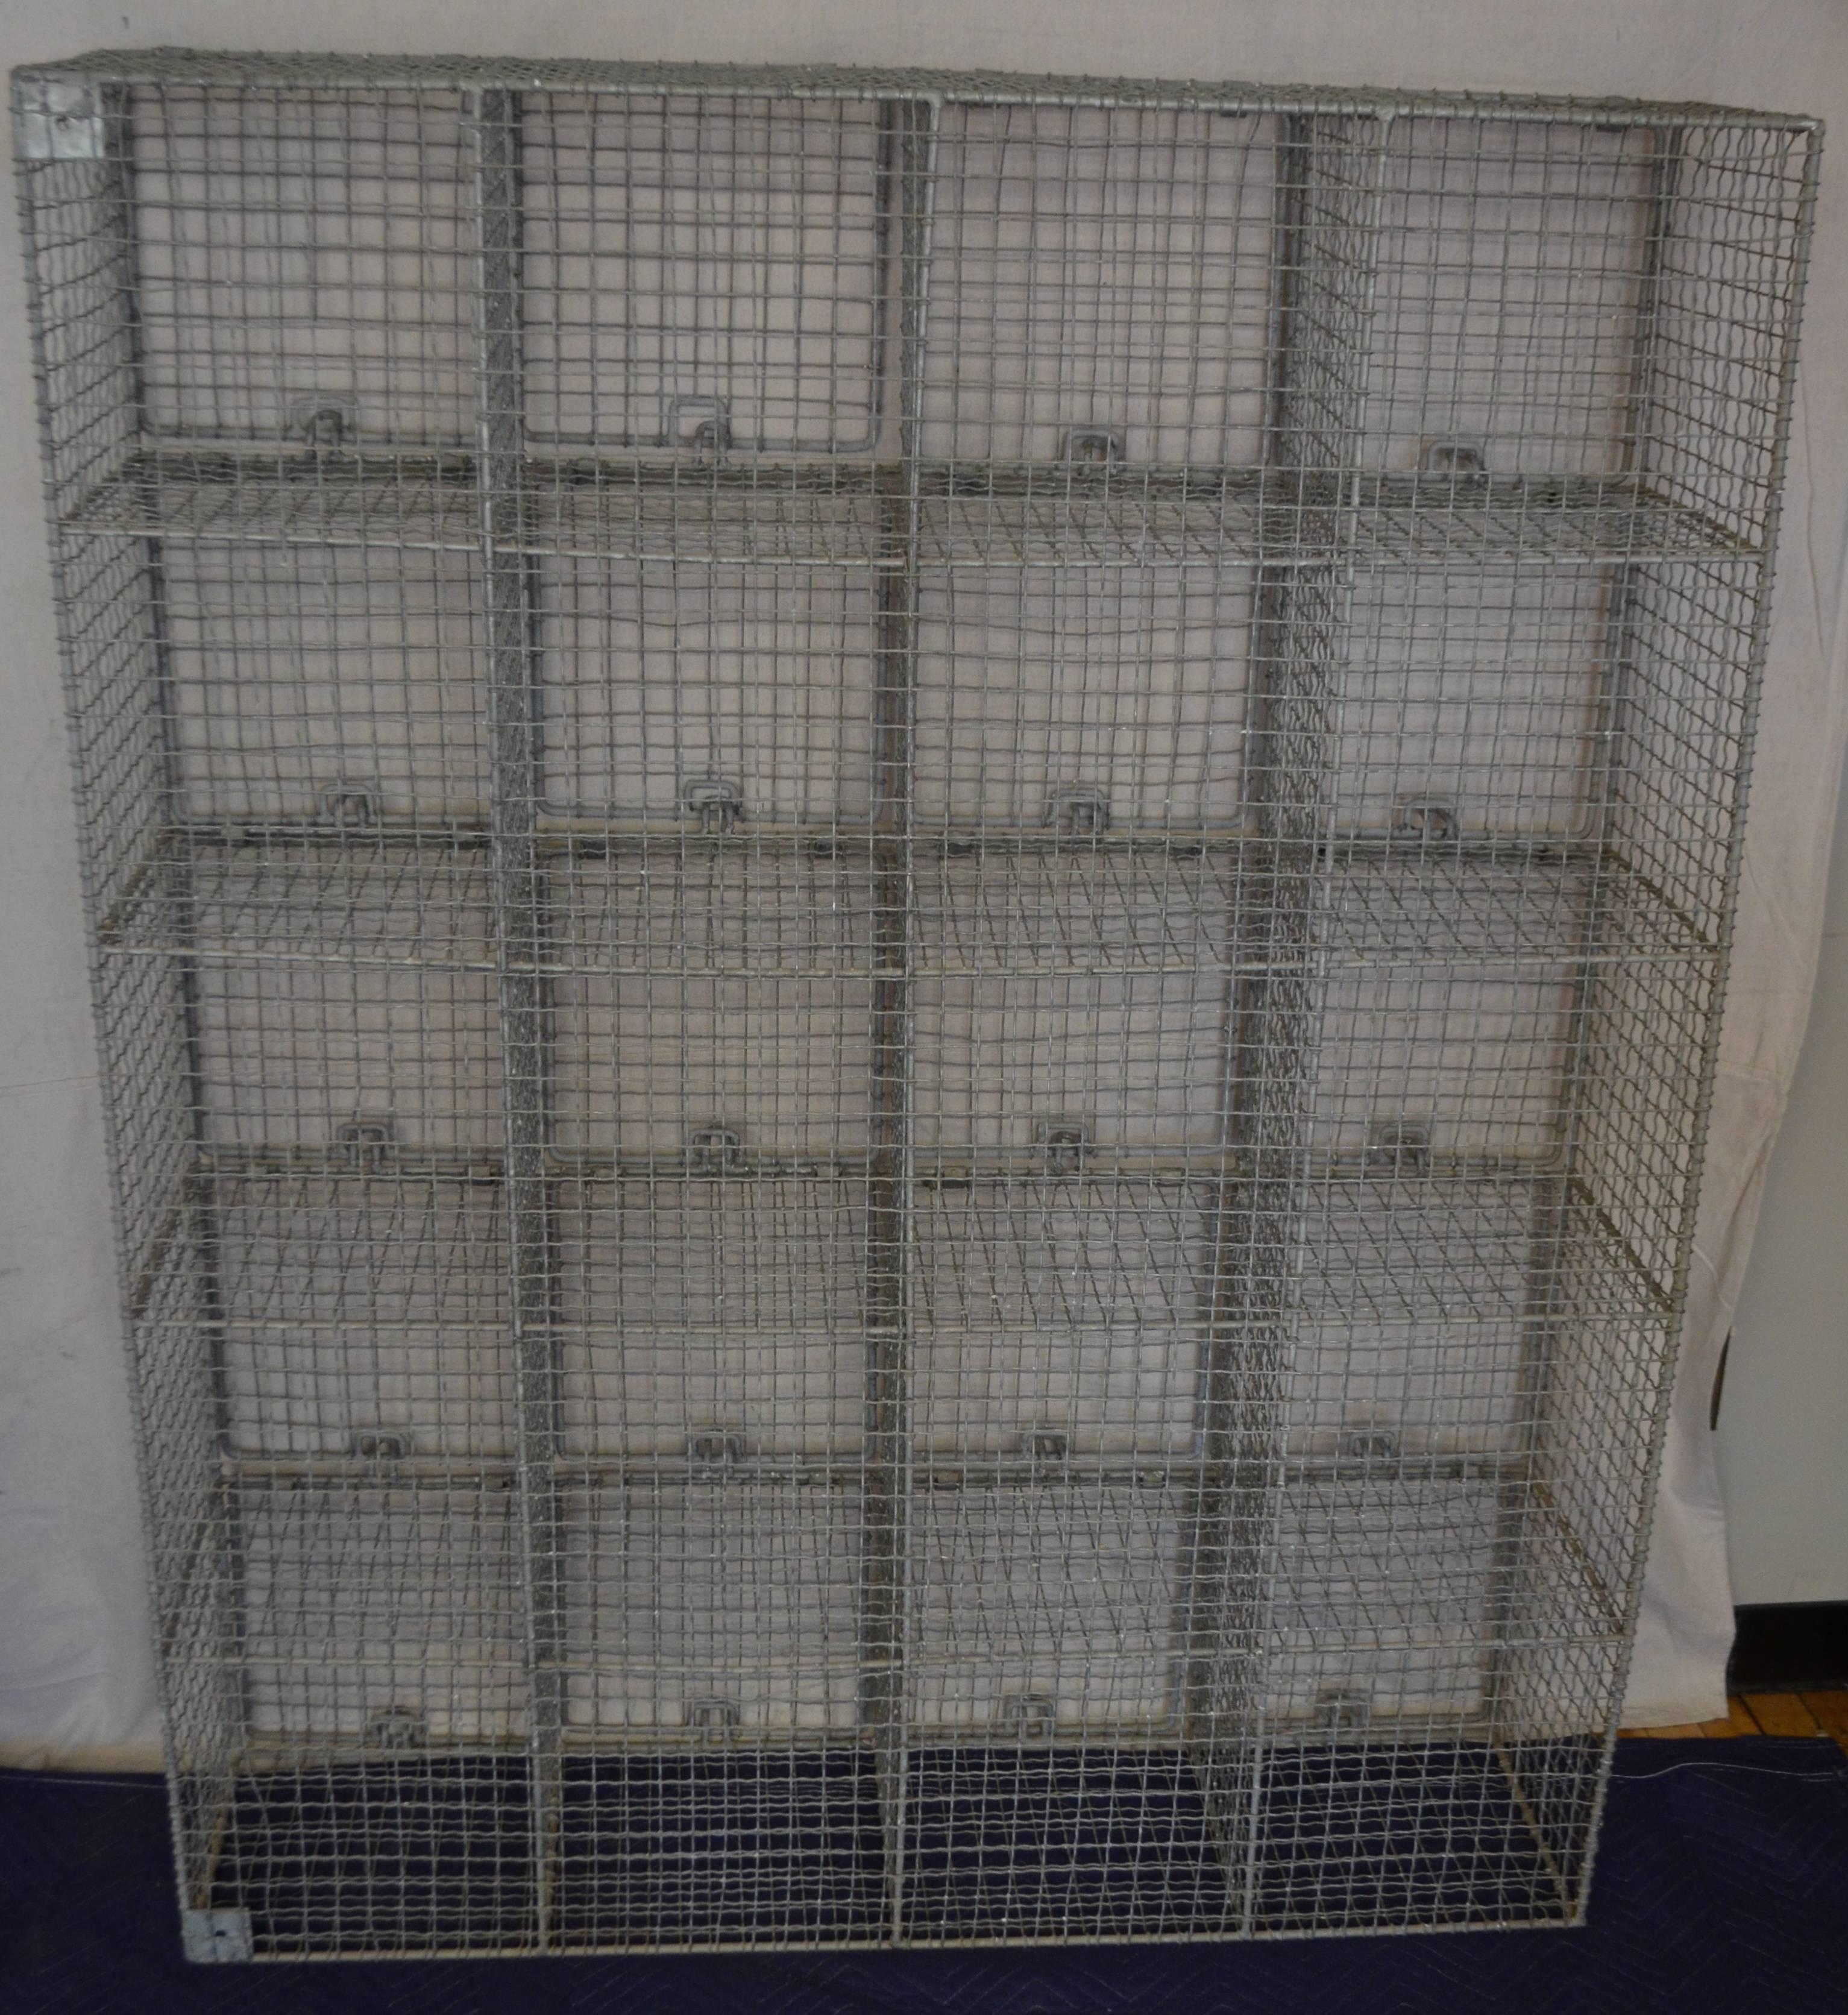 Storage cabinet with 20 steel wire cubbies, each with doors that swing up to open and close with loops that can be padlocked. Its use is myriad and versatile. In the entranceway for boots and gloves. In the bath for towels and accessories. In the